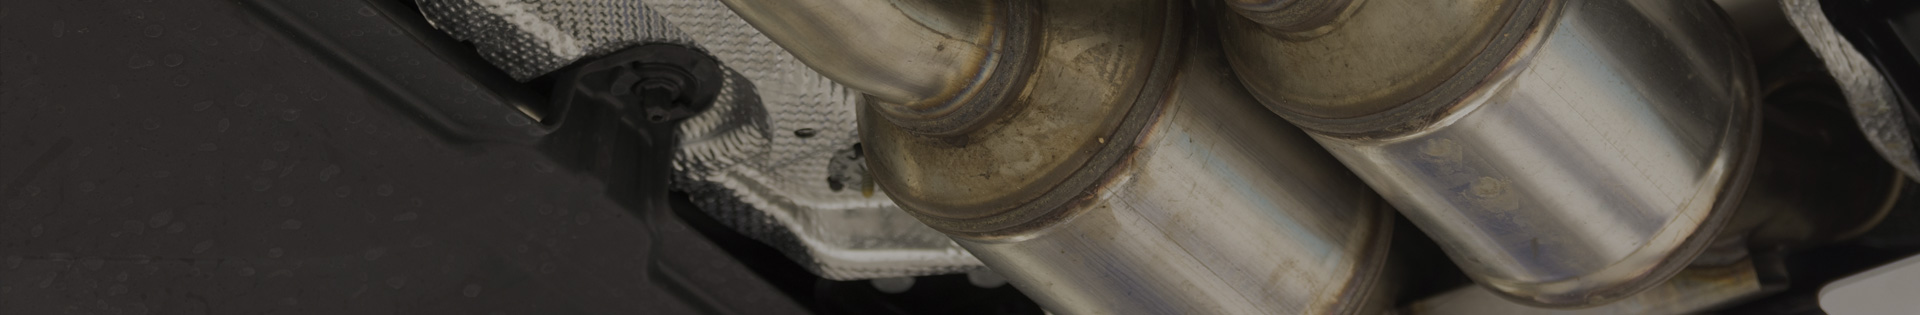 Catalytic Converter Replacement in Albany, CA - Adams Autoworx Albany